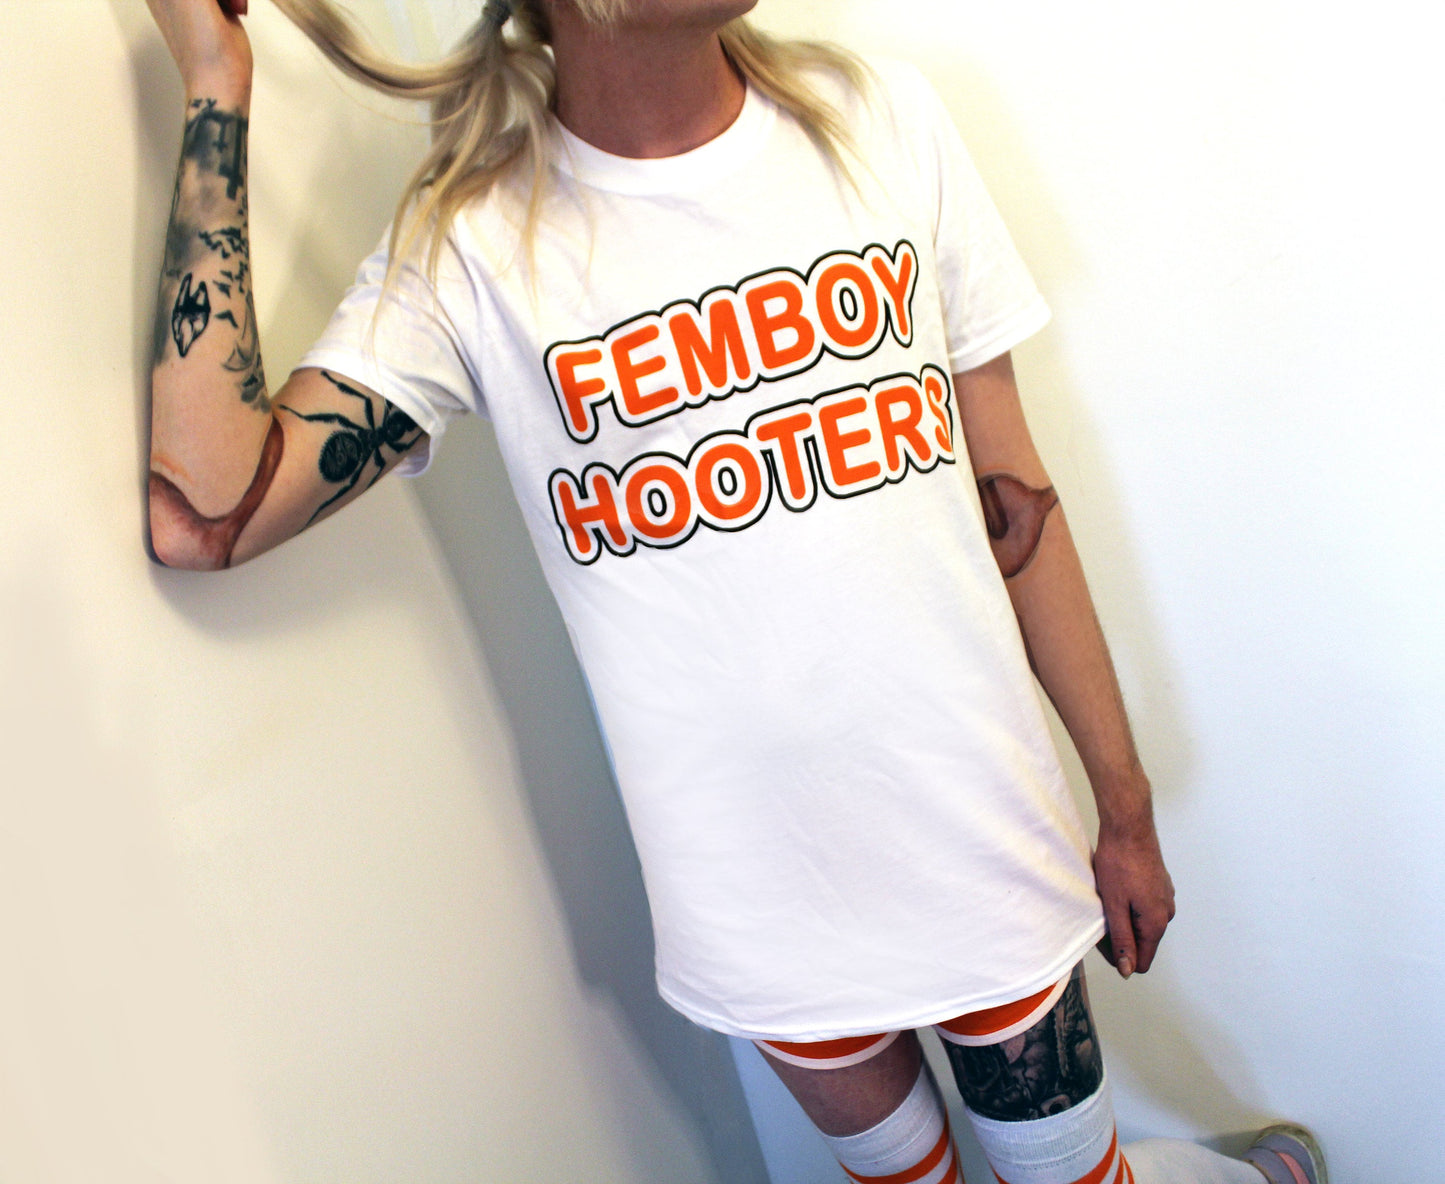 Femboy Hooters Cosplay & T-Shirts (Sizes S-XXL)